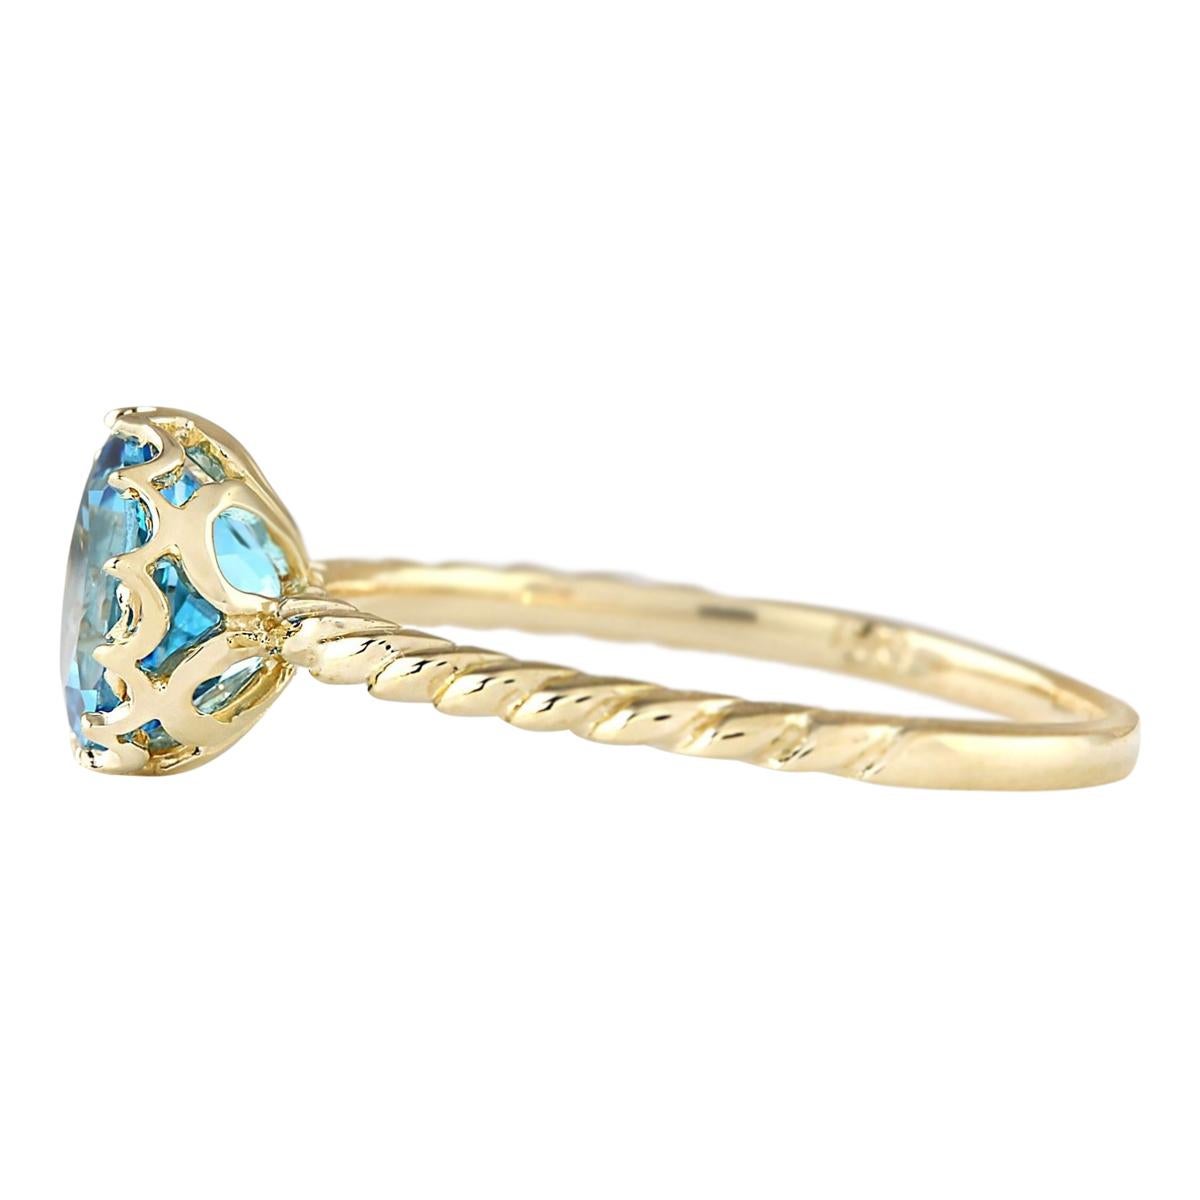 Introducing our stunning 14 Karat Yellow Gold Ring adorned with a breathtaking 1.50 Carat Natural Topaz gemstone. Stamped for authenticity, this ring weighs a mere 1.2 grams, ensuring comfort and wearability. The Topaz gemstone, boasting a weight of